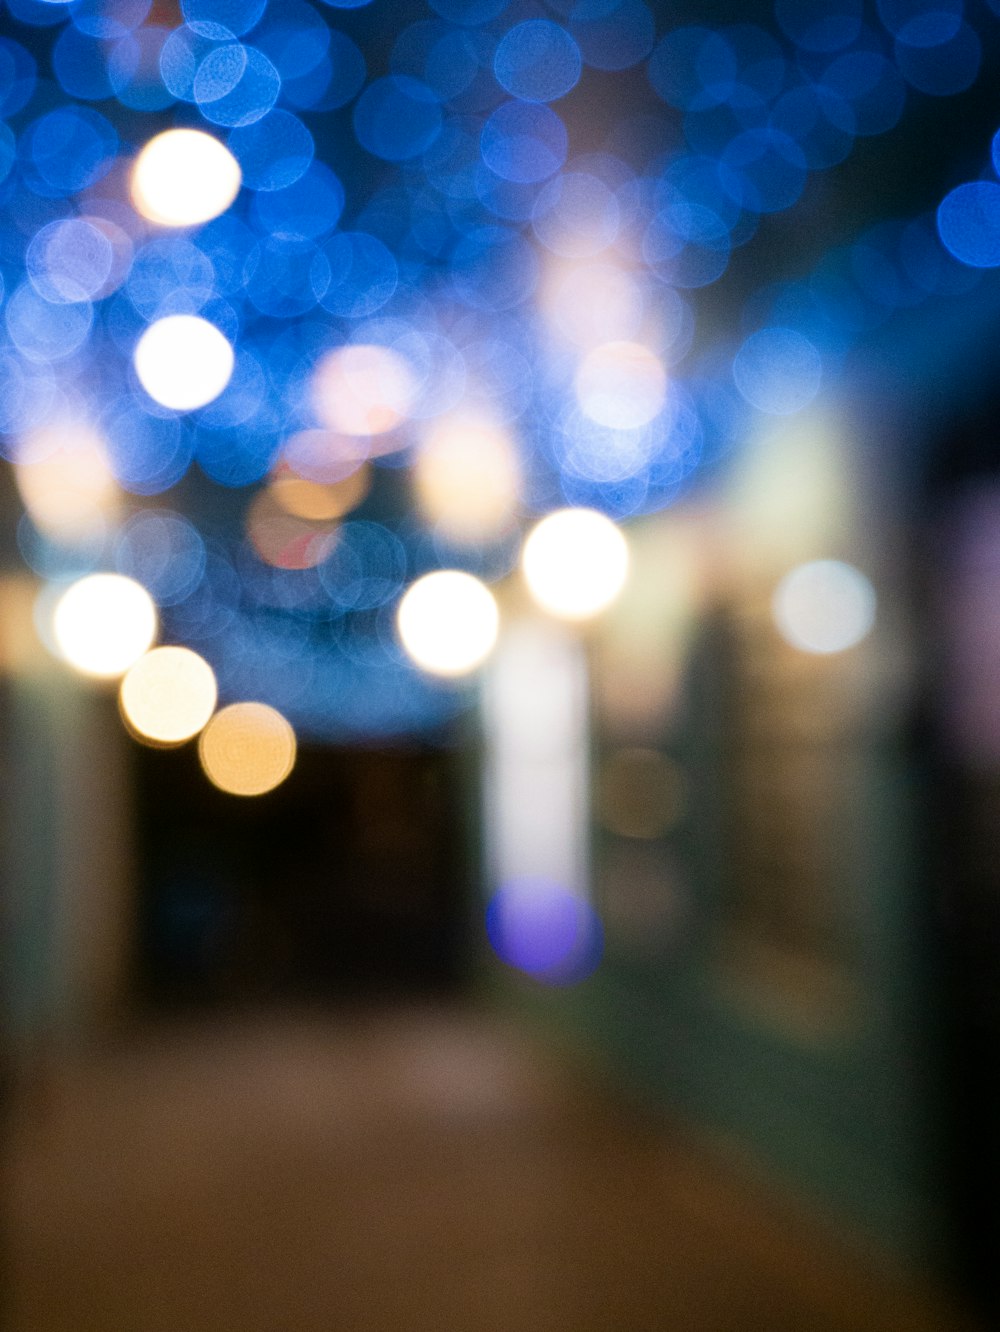 1000+ Night Blur Pictures | Download Free Images on Unsplash